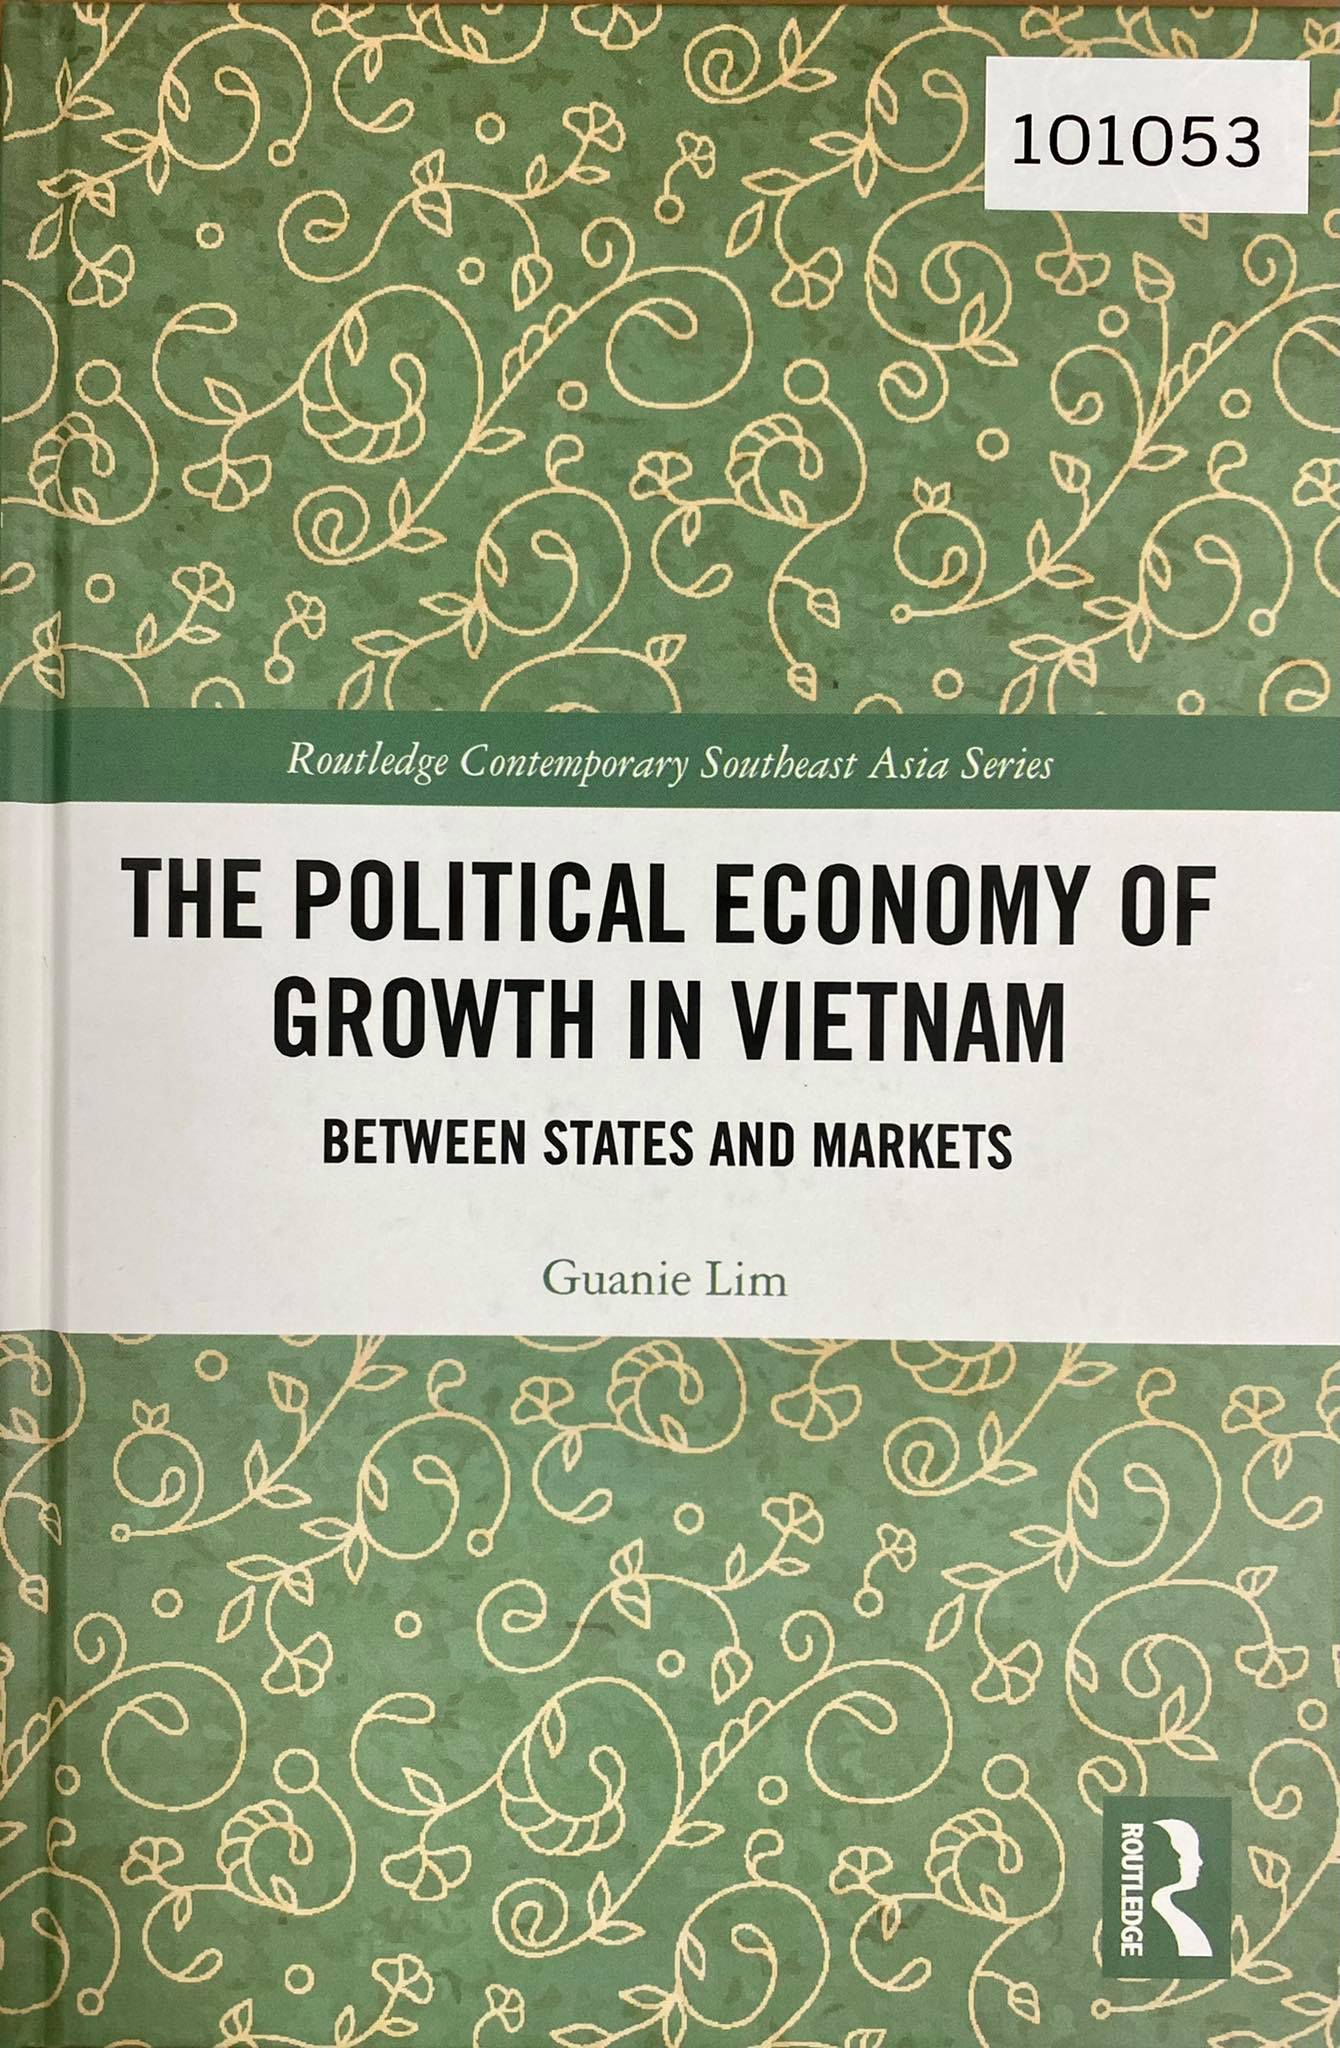 The Political Economy of Growth in Vietnam: Between States and Markets